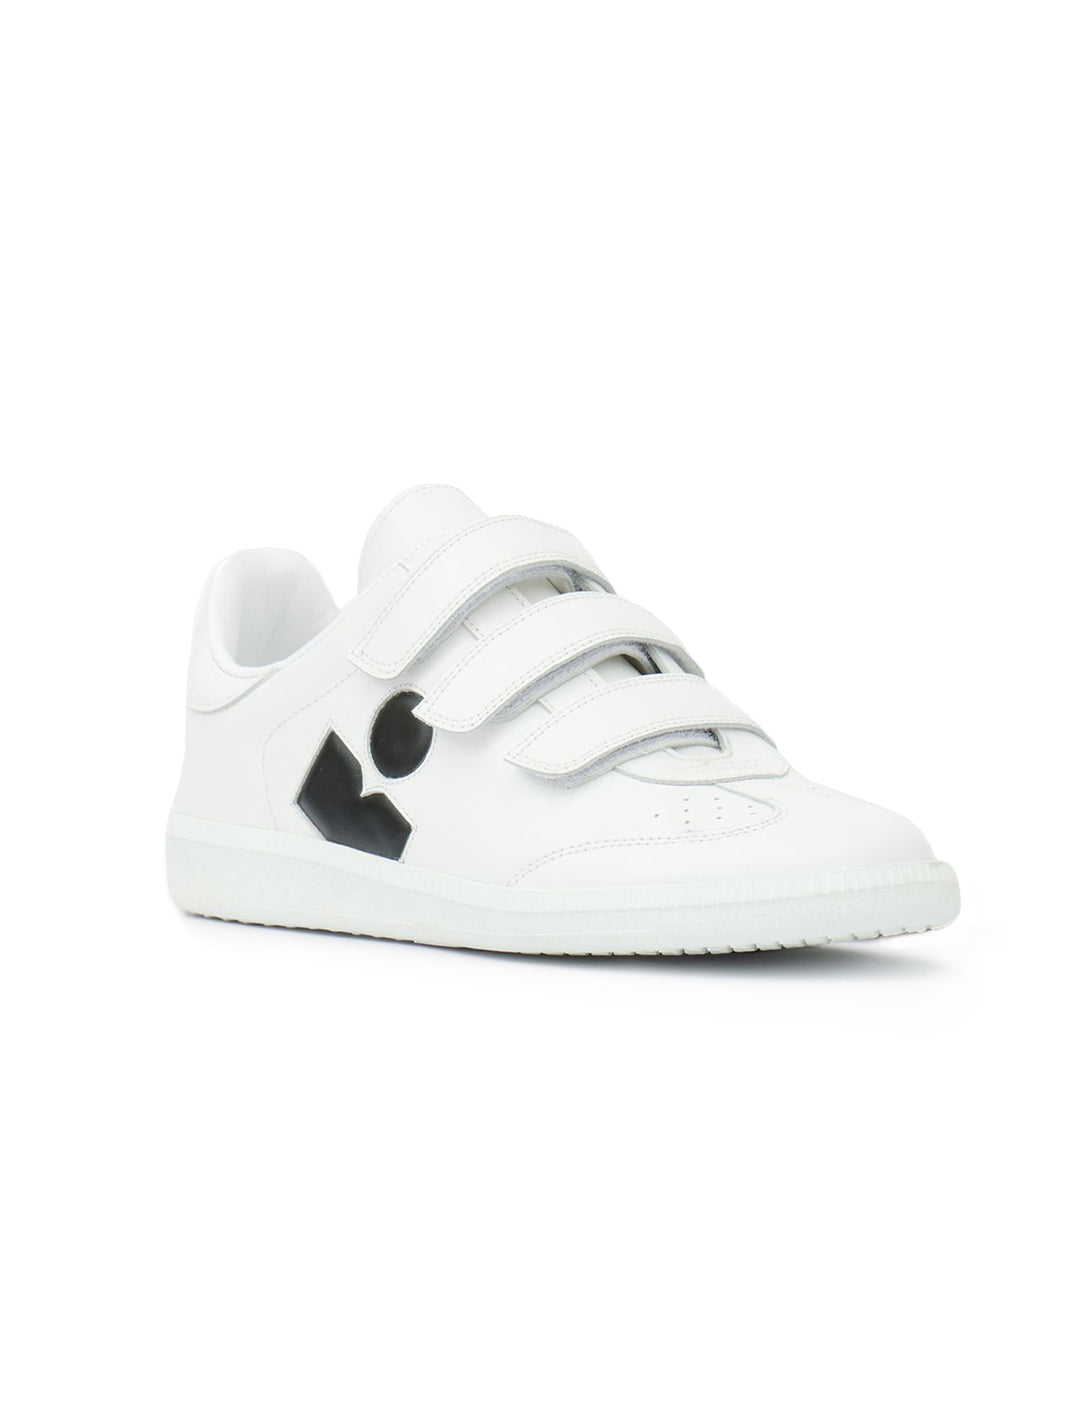 beth sneaker in white and black